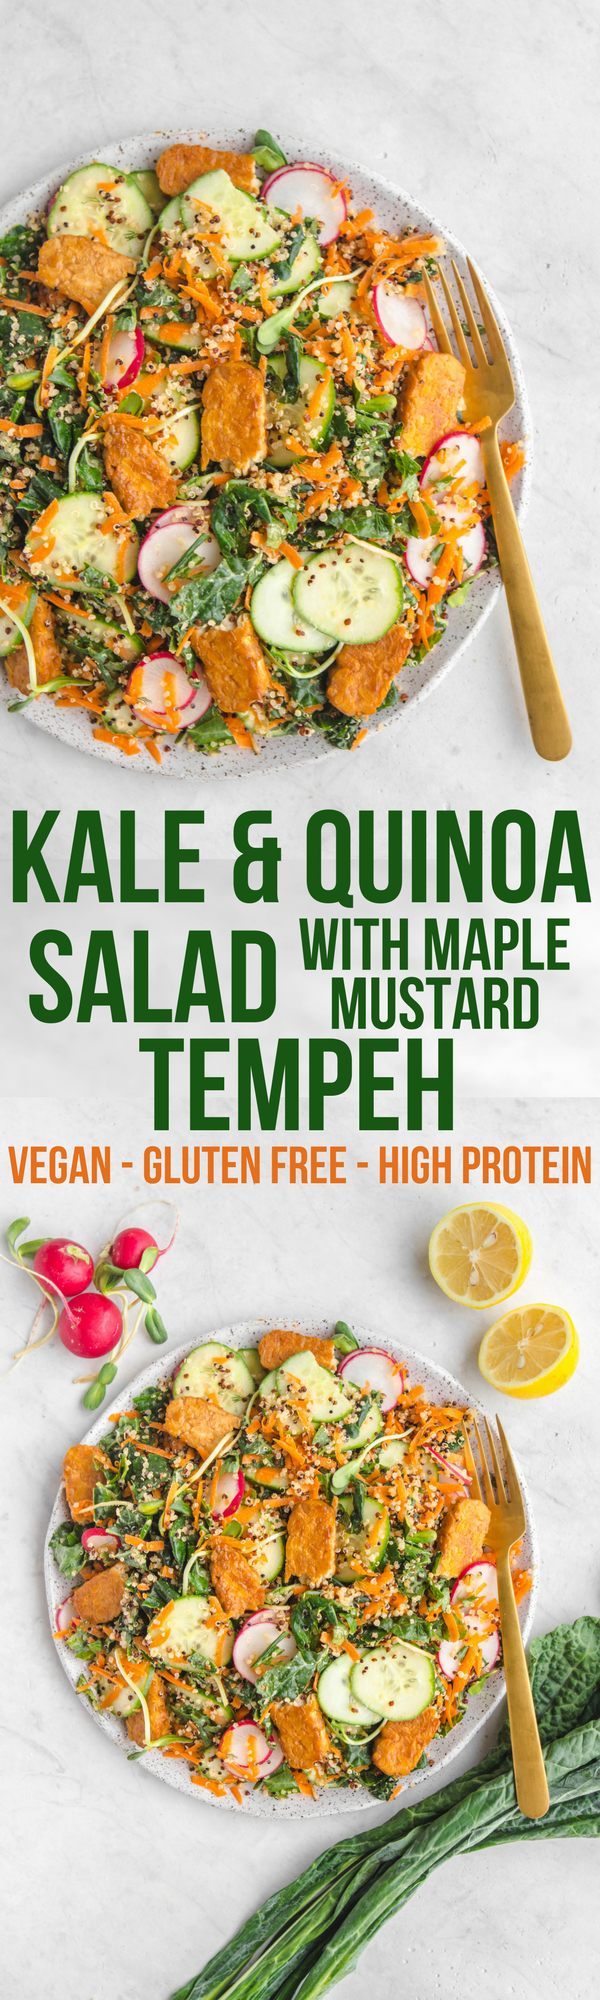 This Kale & Quinoa Salad with Tempeh is an easy and healthy vegan dinner idea! #vegan #salad #quinoa #kale #plantbased #glutenfree